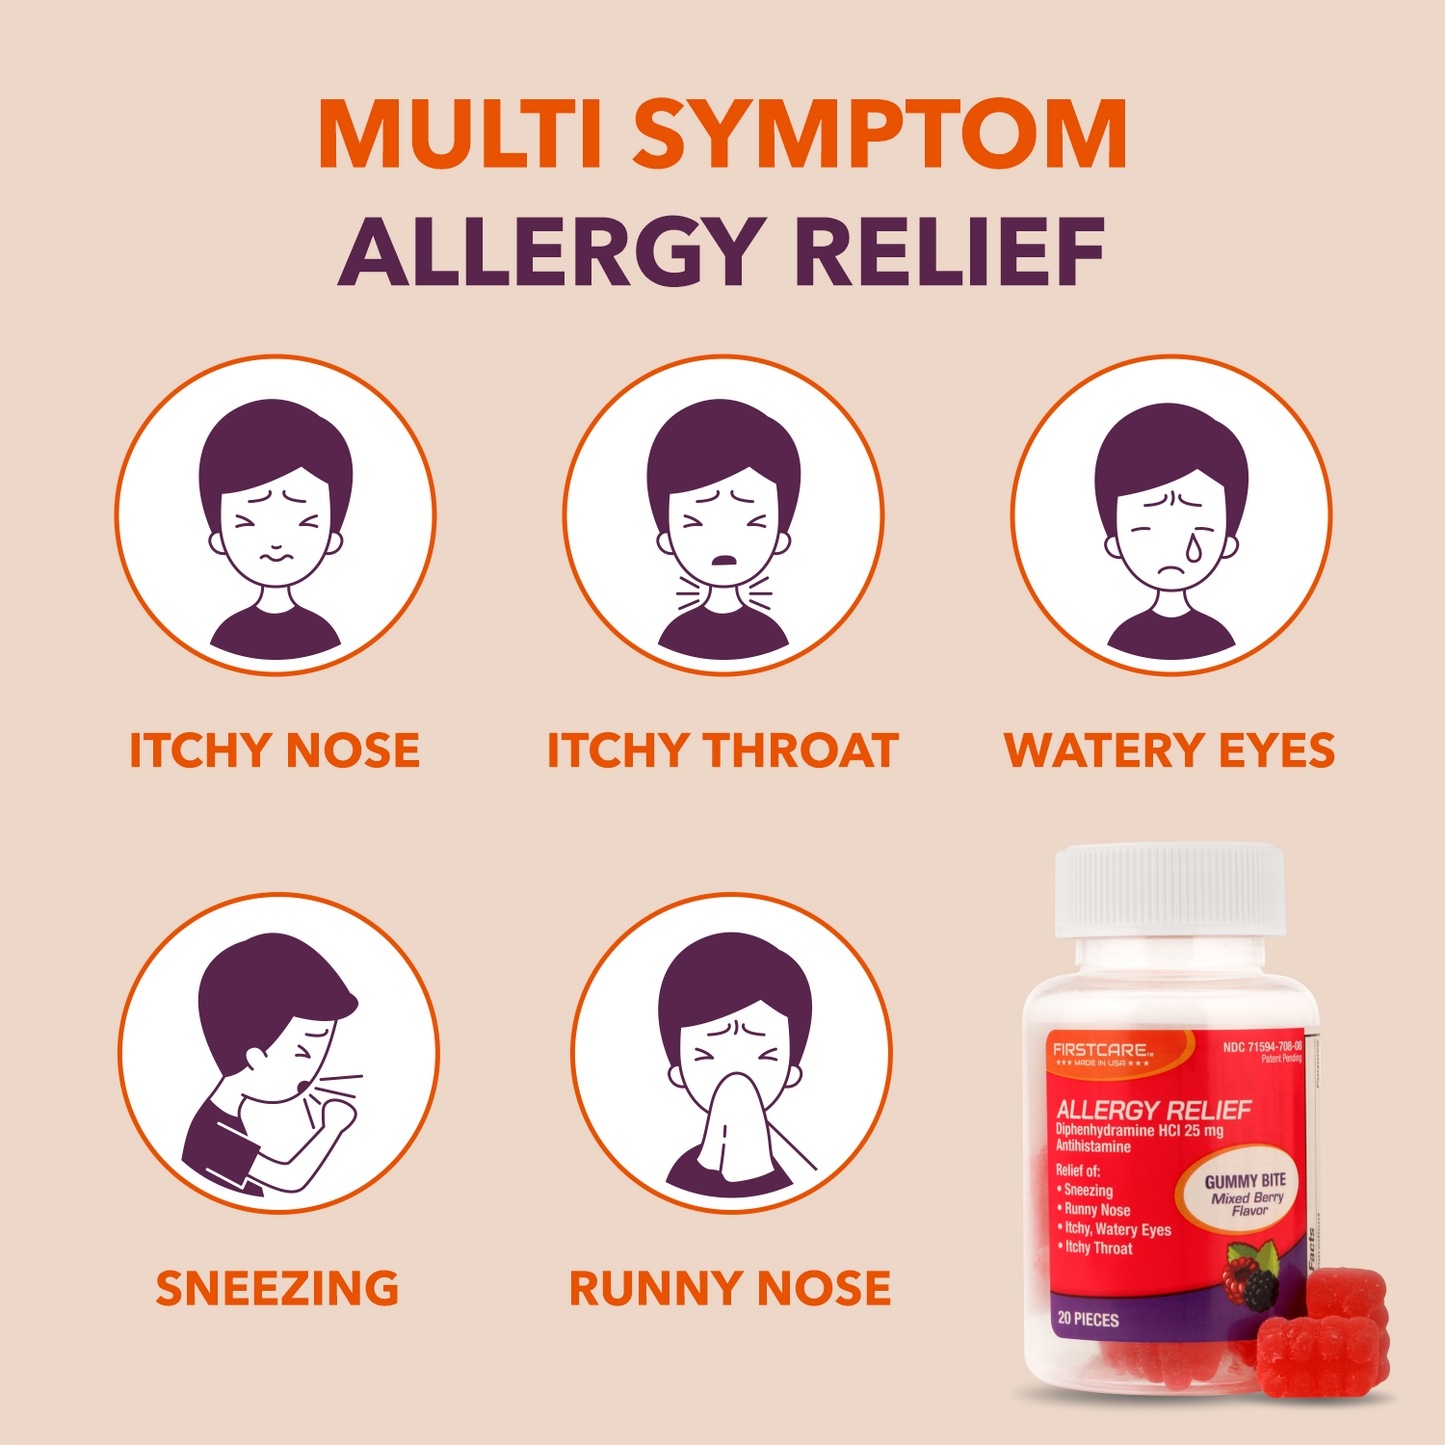 multi symptom allergy relief - itchy nose, itchy throat, watery eyes, sneezing and runny nose